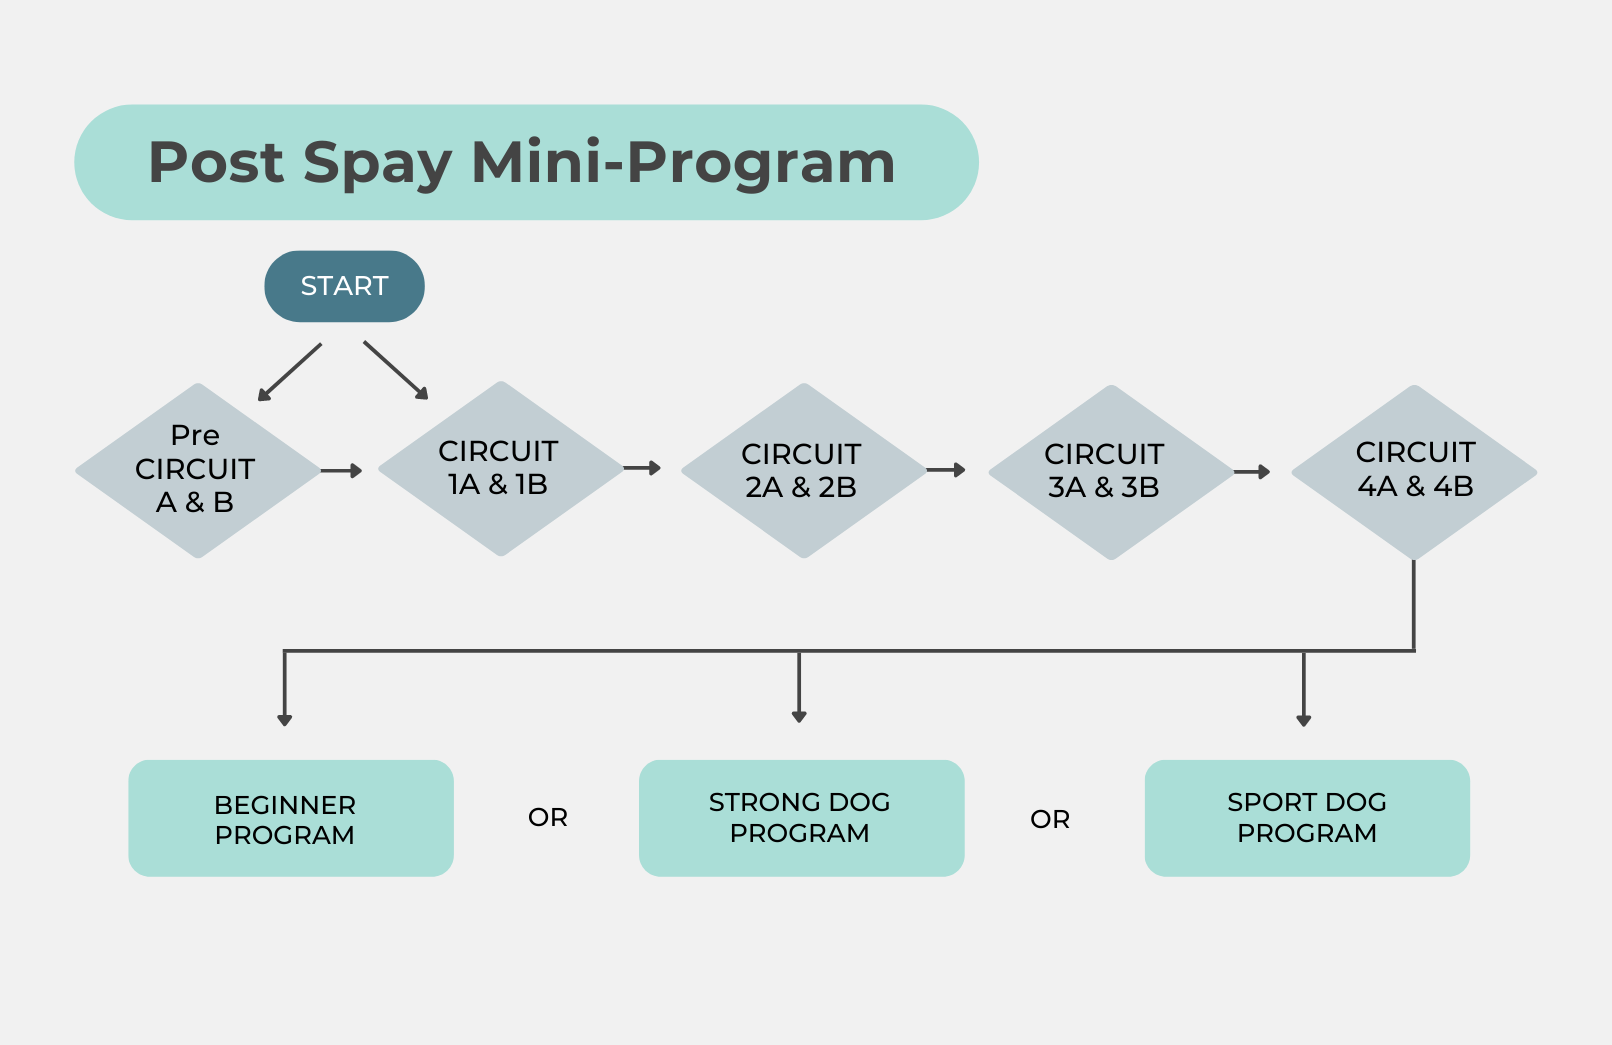 Map showing the circuit progression through the Post Spay Mini-Program